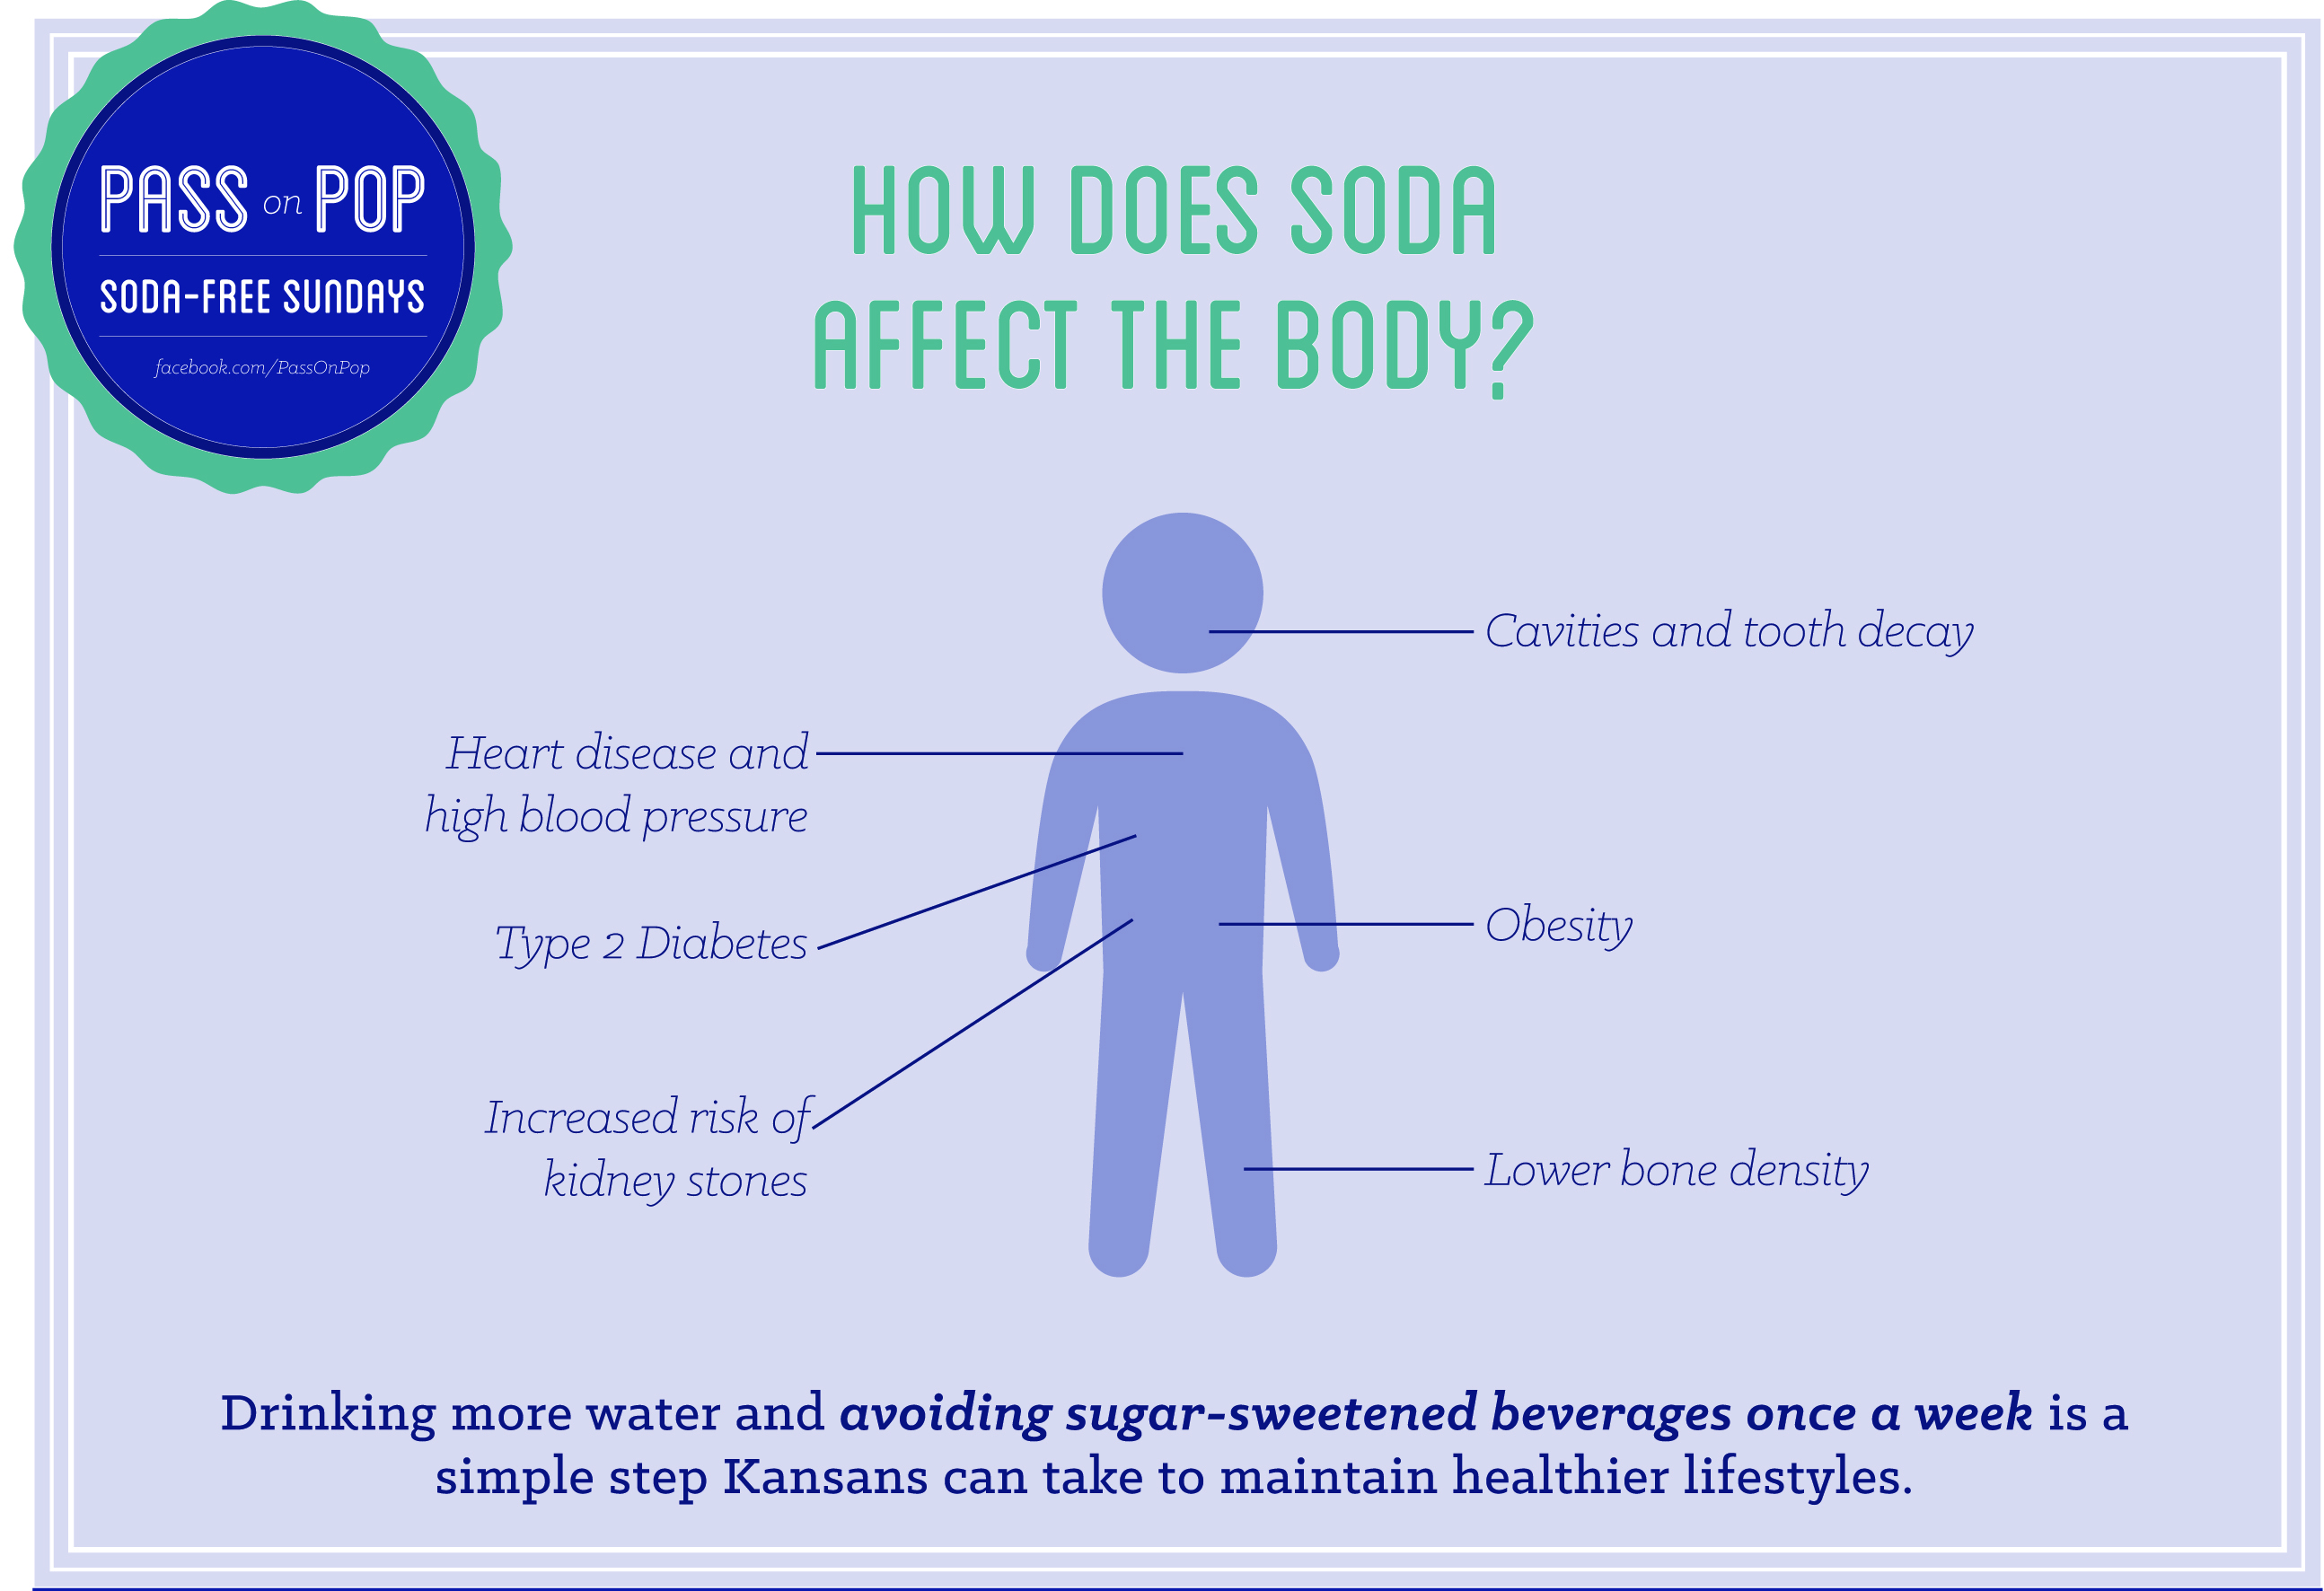 How Does Soda Affect the Body?  Cavities and tooth decay, Heart disease and high blood pressure, Type 2 Diabetes, Obesity, Increased risk of kidney stones, Lower bone density.  Drinking more water and avoiding sugar-sweetened beverages once a week is a simple step Kansans can take to maintain healthier lifestyles.